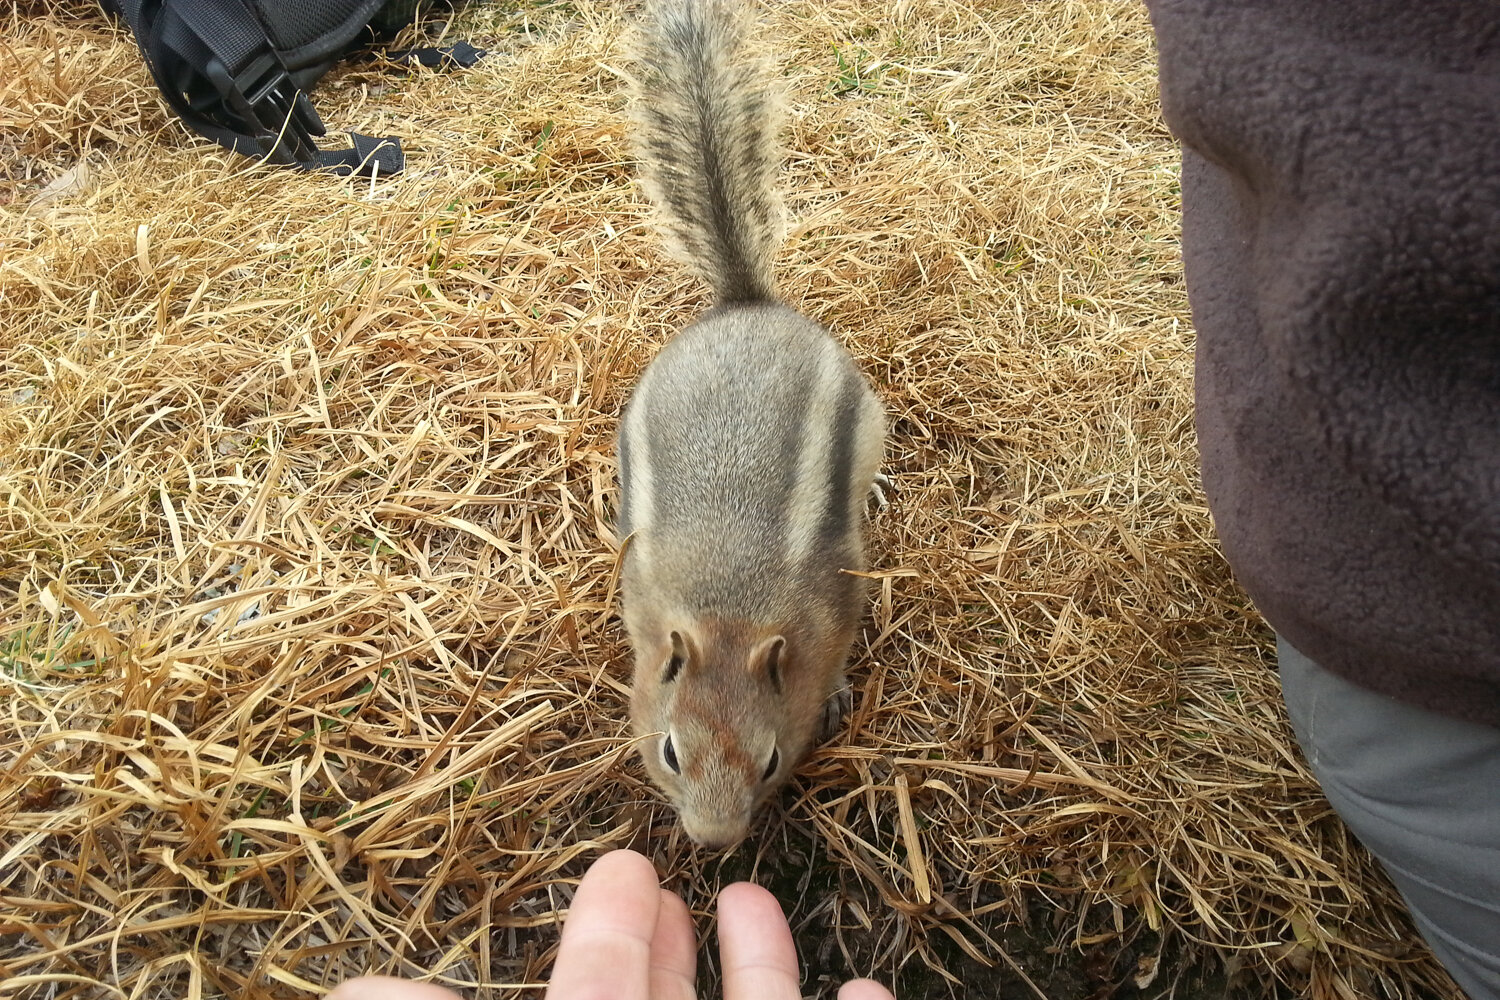 A curious chipmunk trying to get a snack